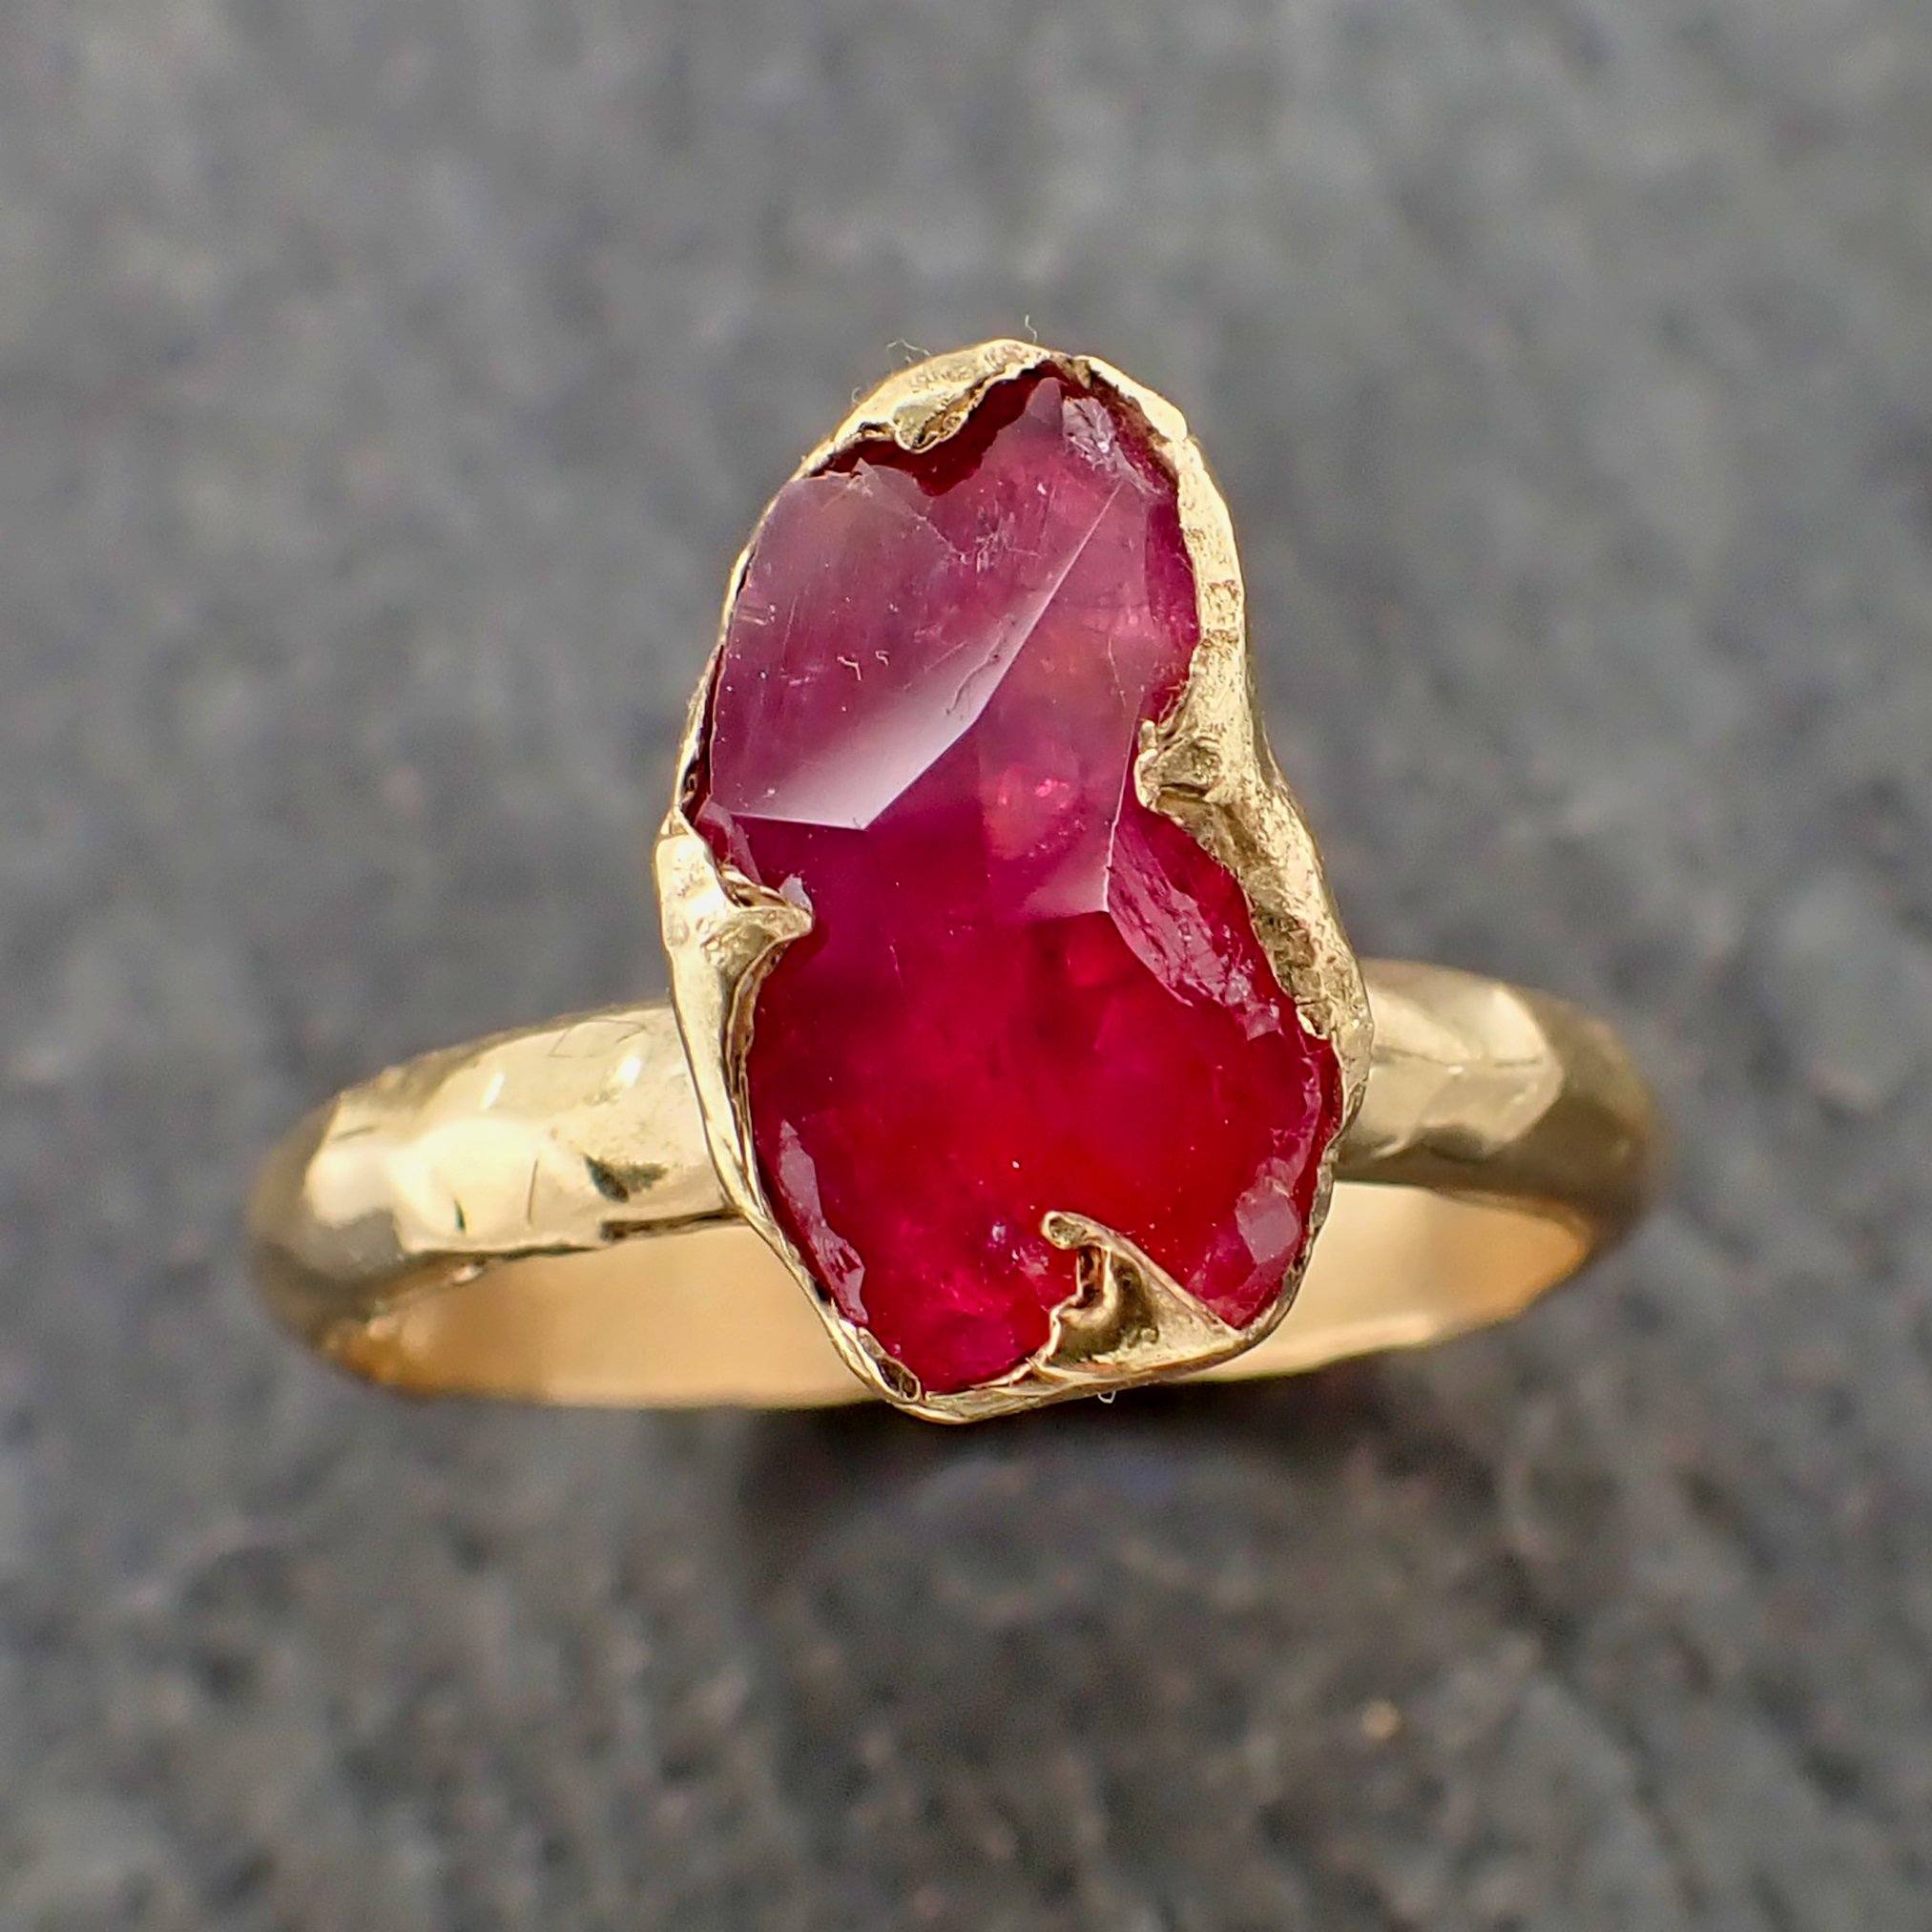 partially faceted pink sapphire 18k yellow gold engagement ring wedding ring custom one of a kind gemstone ring solitaire 2188 Alternative Engagement